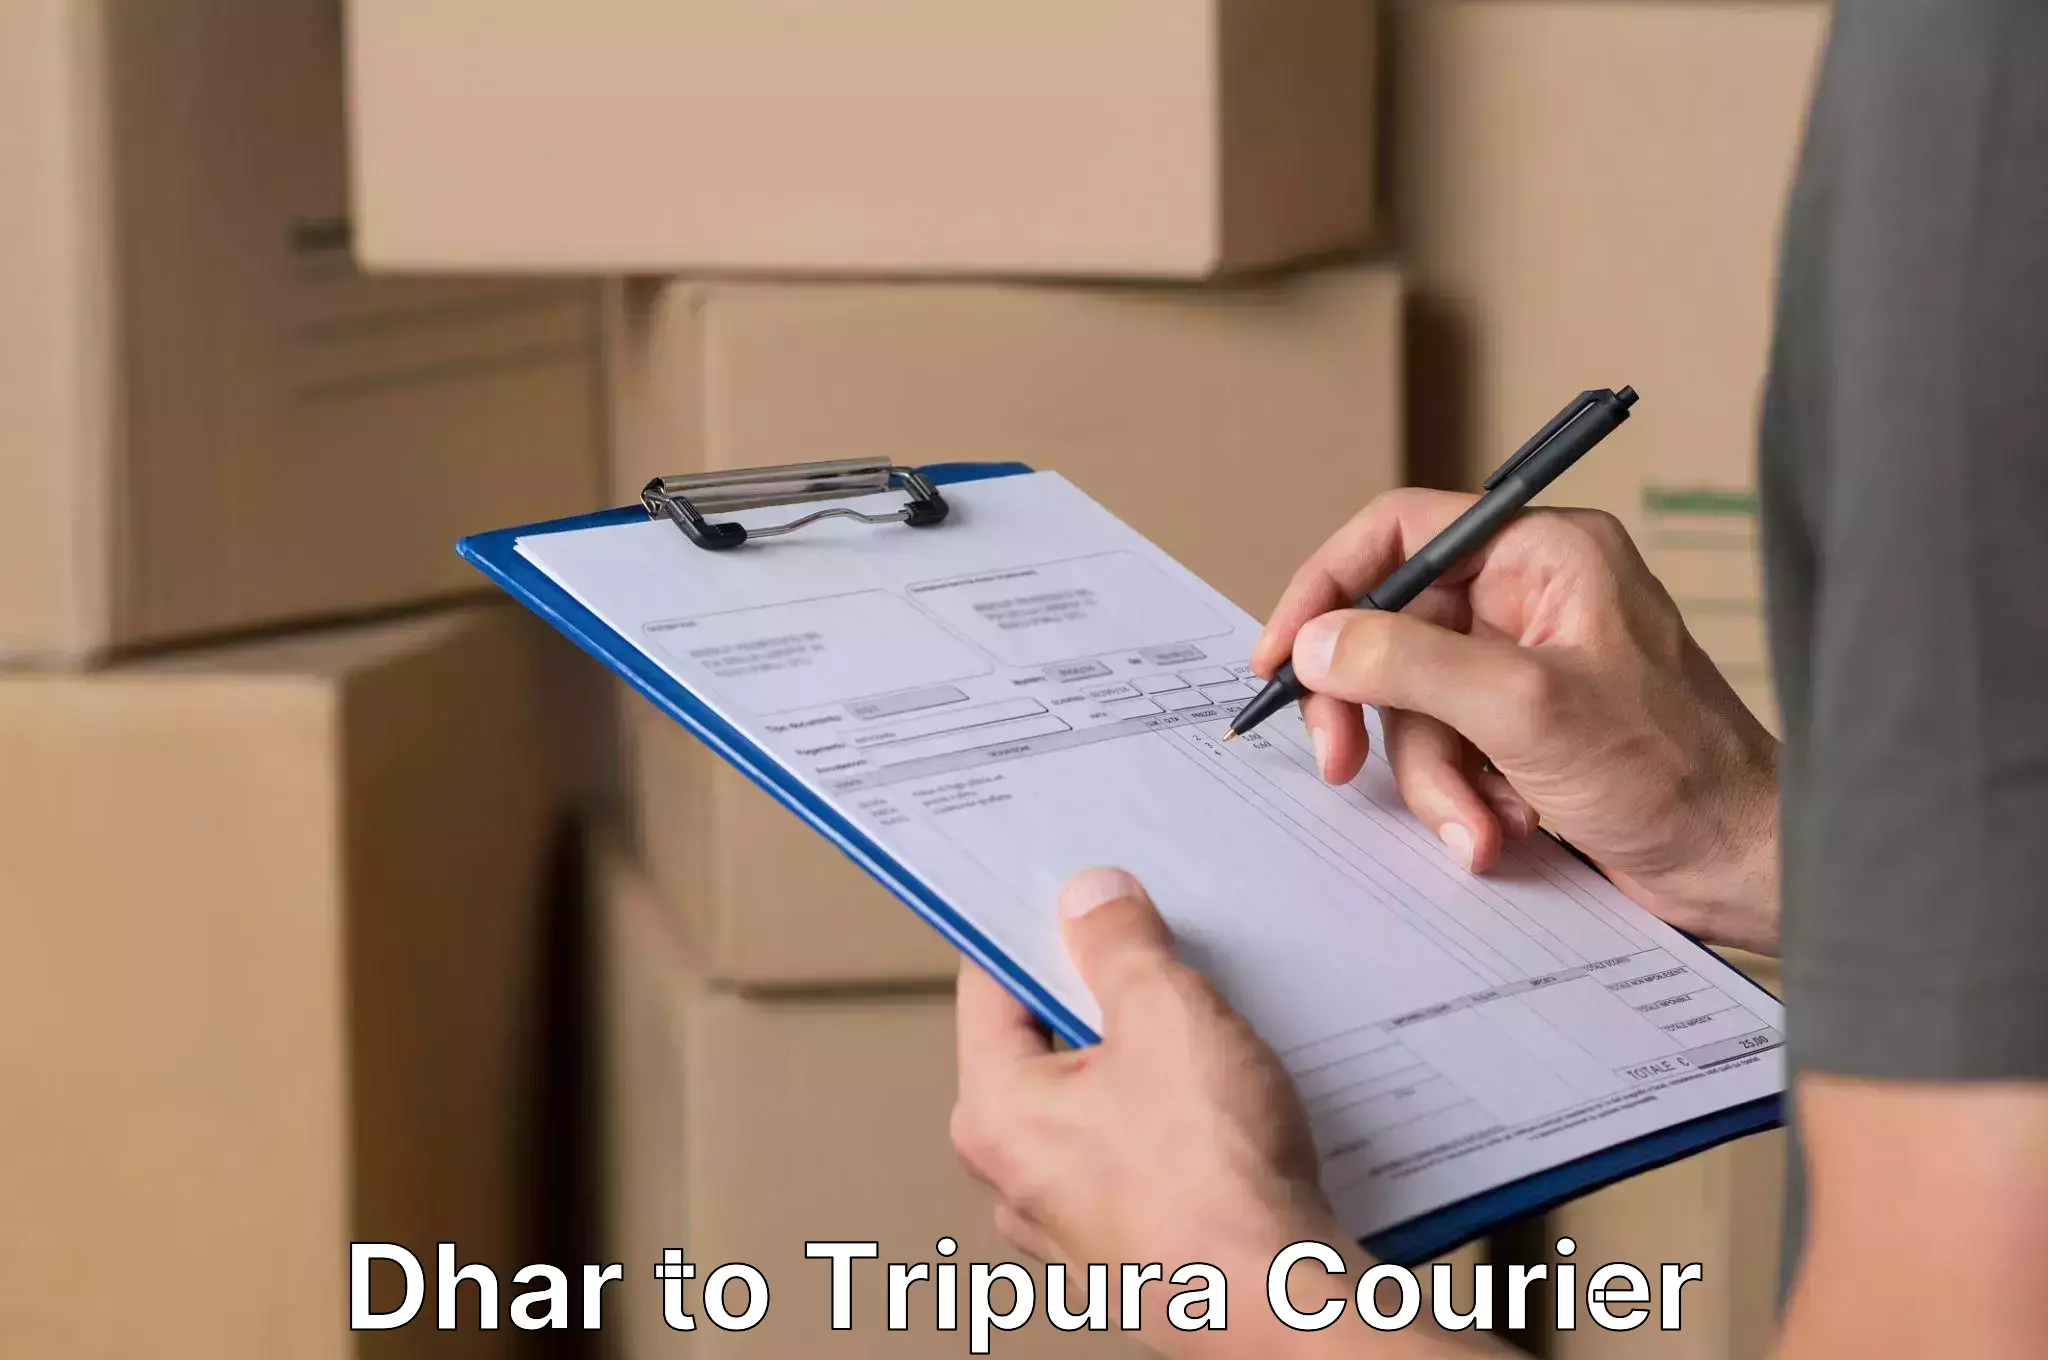 Trusted relocation experts Dhar to Udaipur Tripura